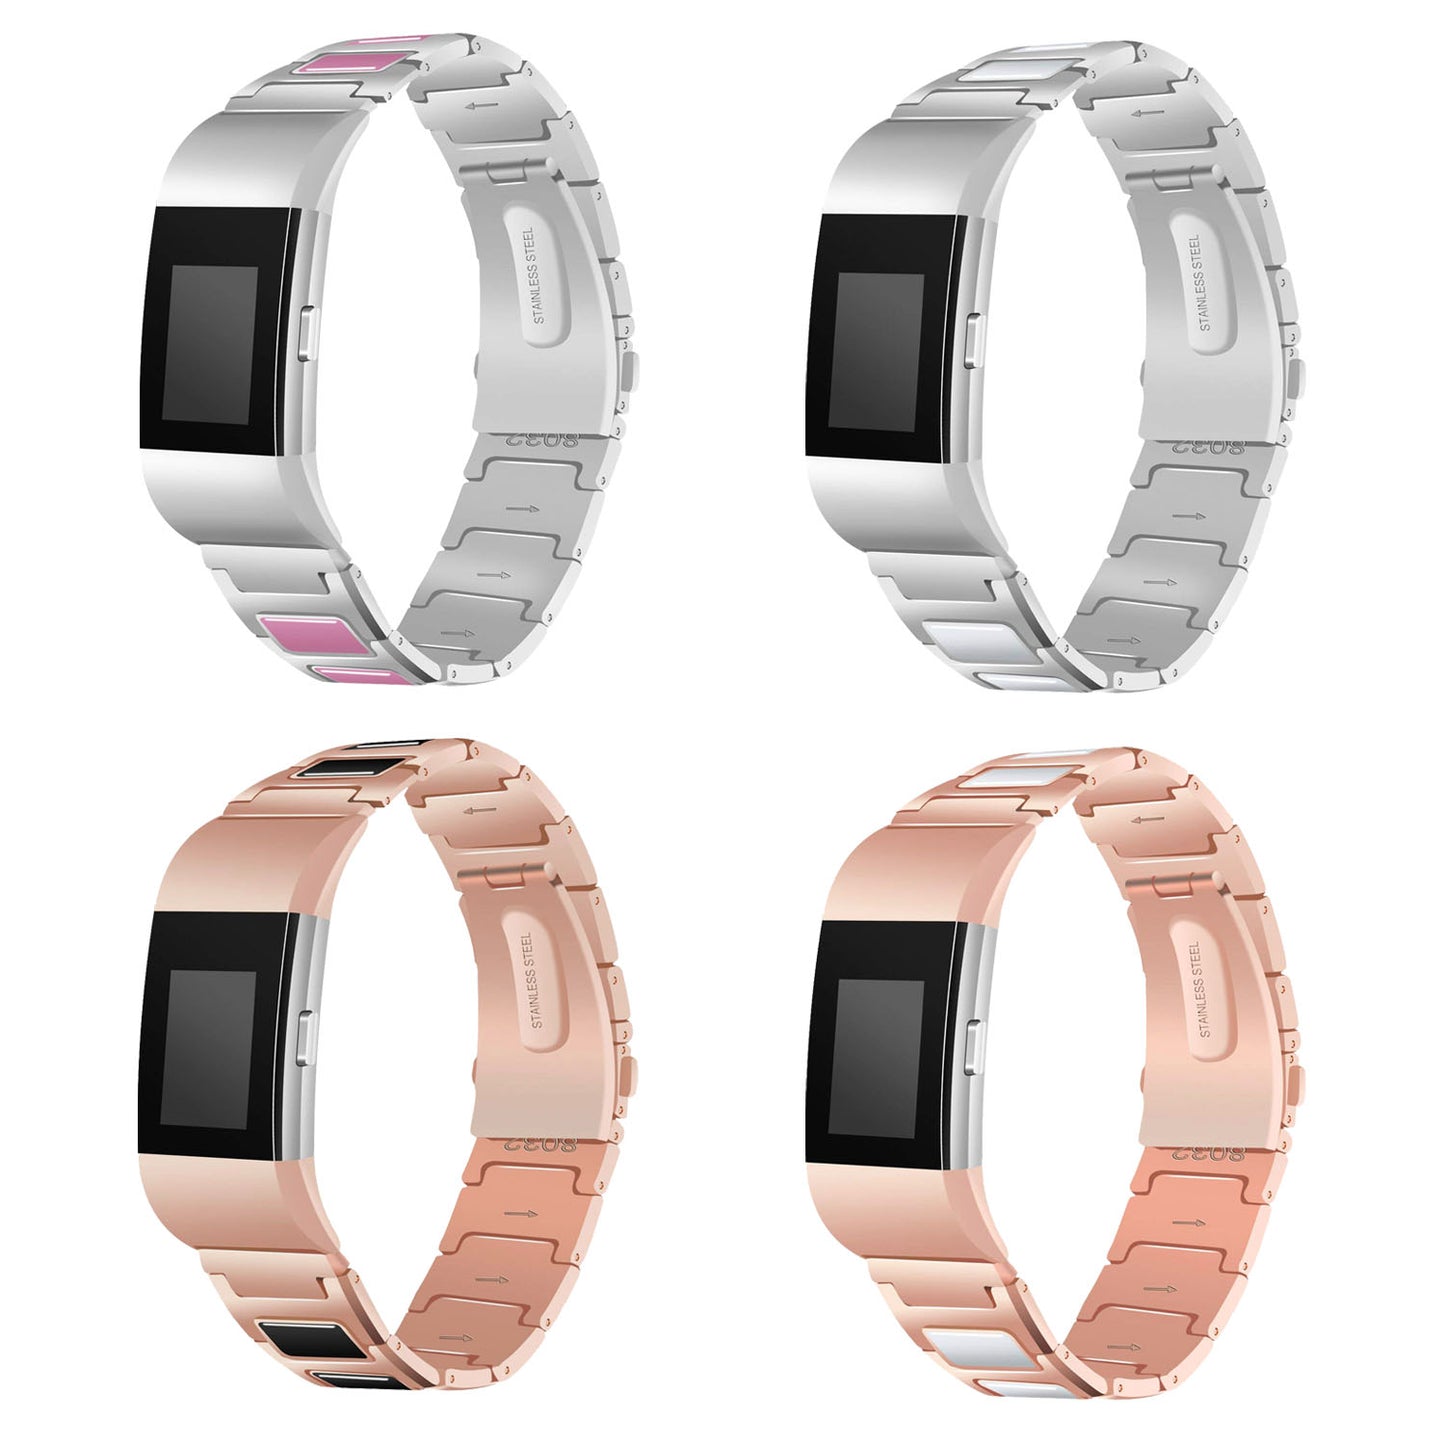 Stainless Steel Ceramic Strap for Fitbit Charge 2